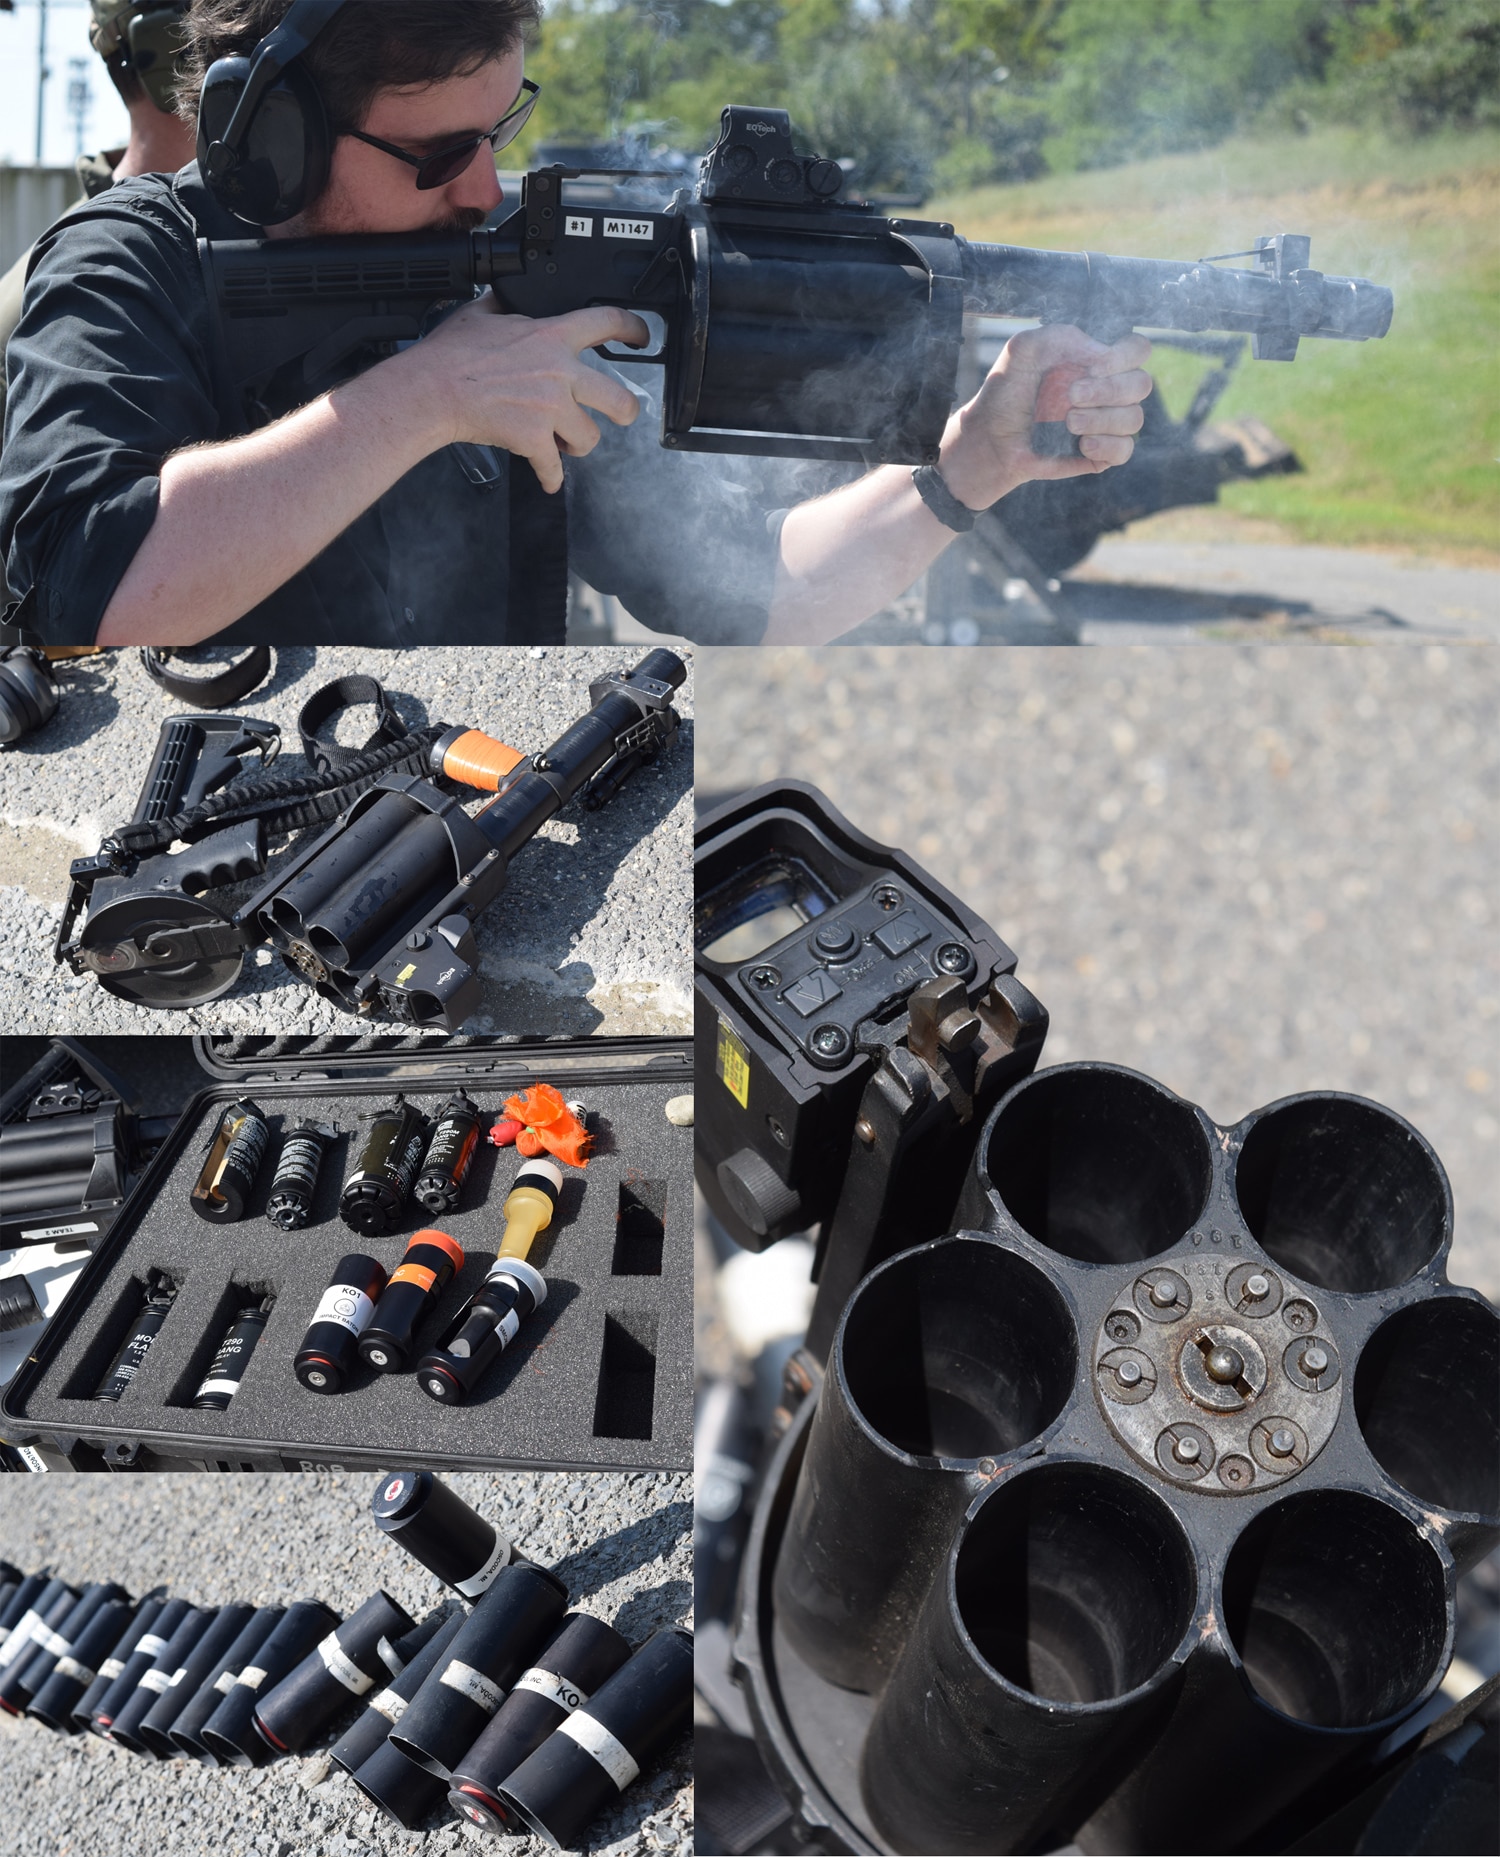 The many sides of a less lethal launcher. The device shoots canisters often containing rubber bullets, but there’s a wide range of ammunition. (Photo: Daniel Terrill/Guns.com)